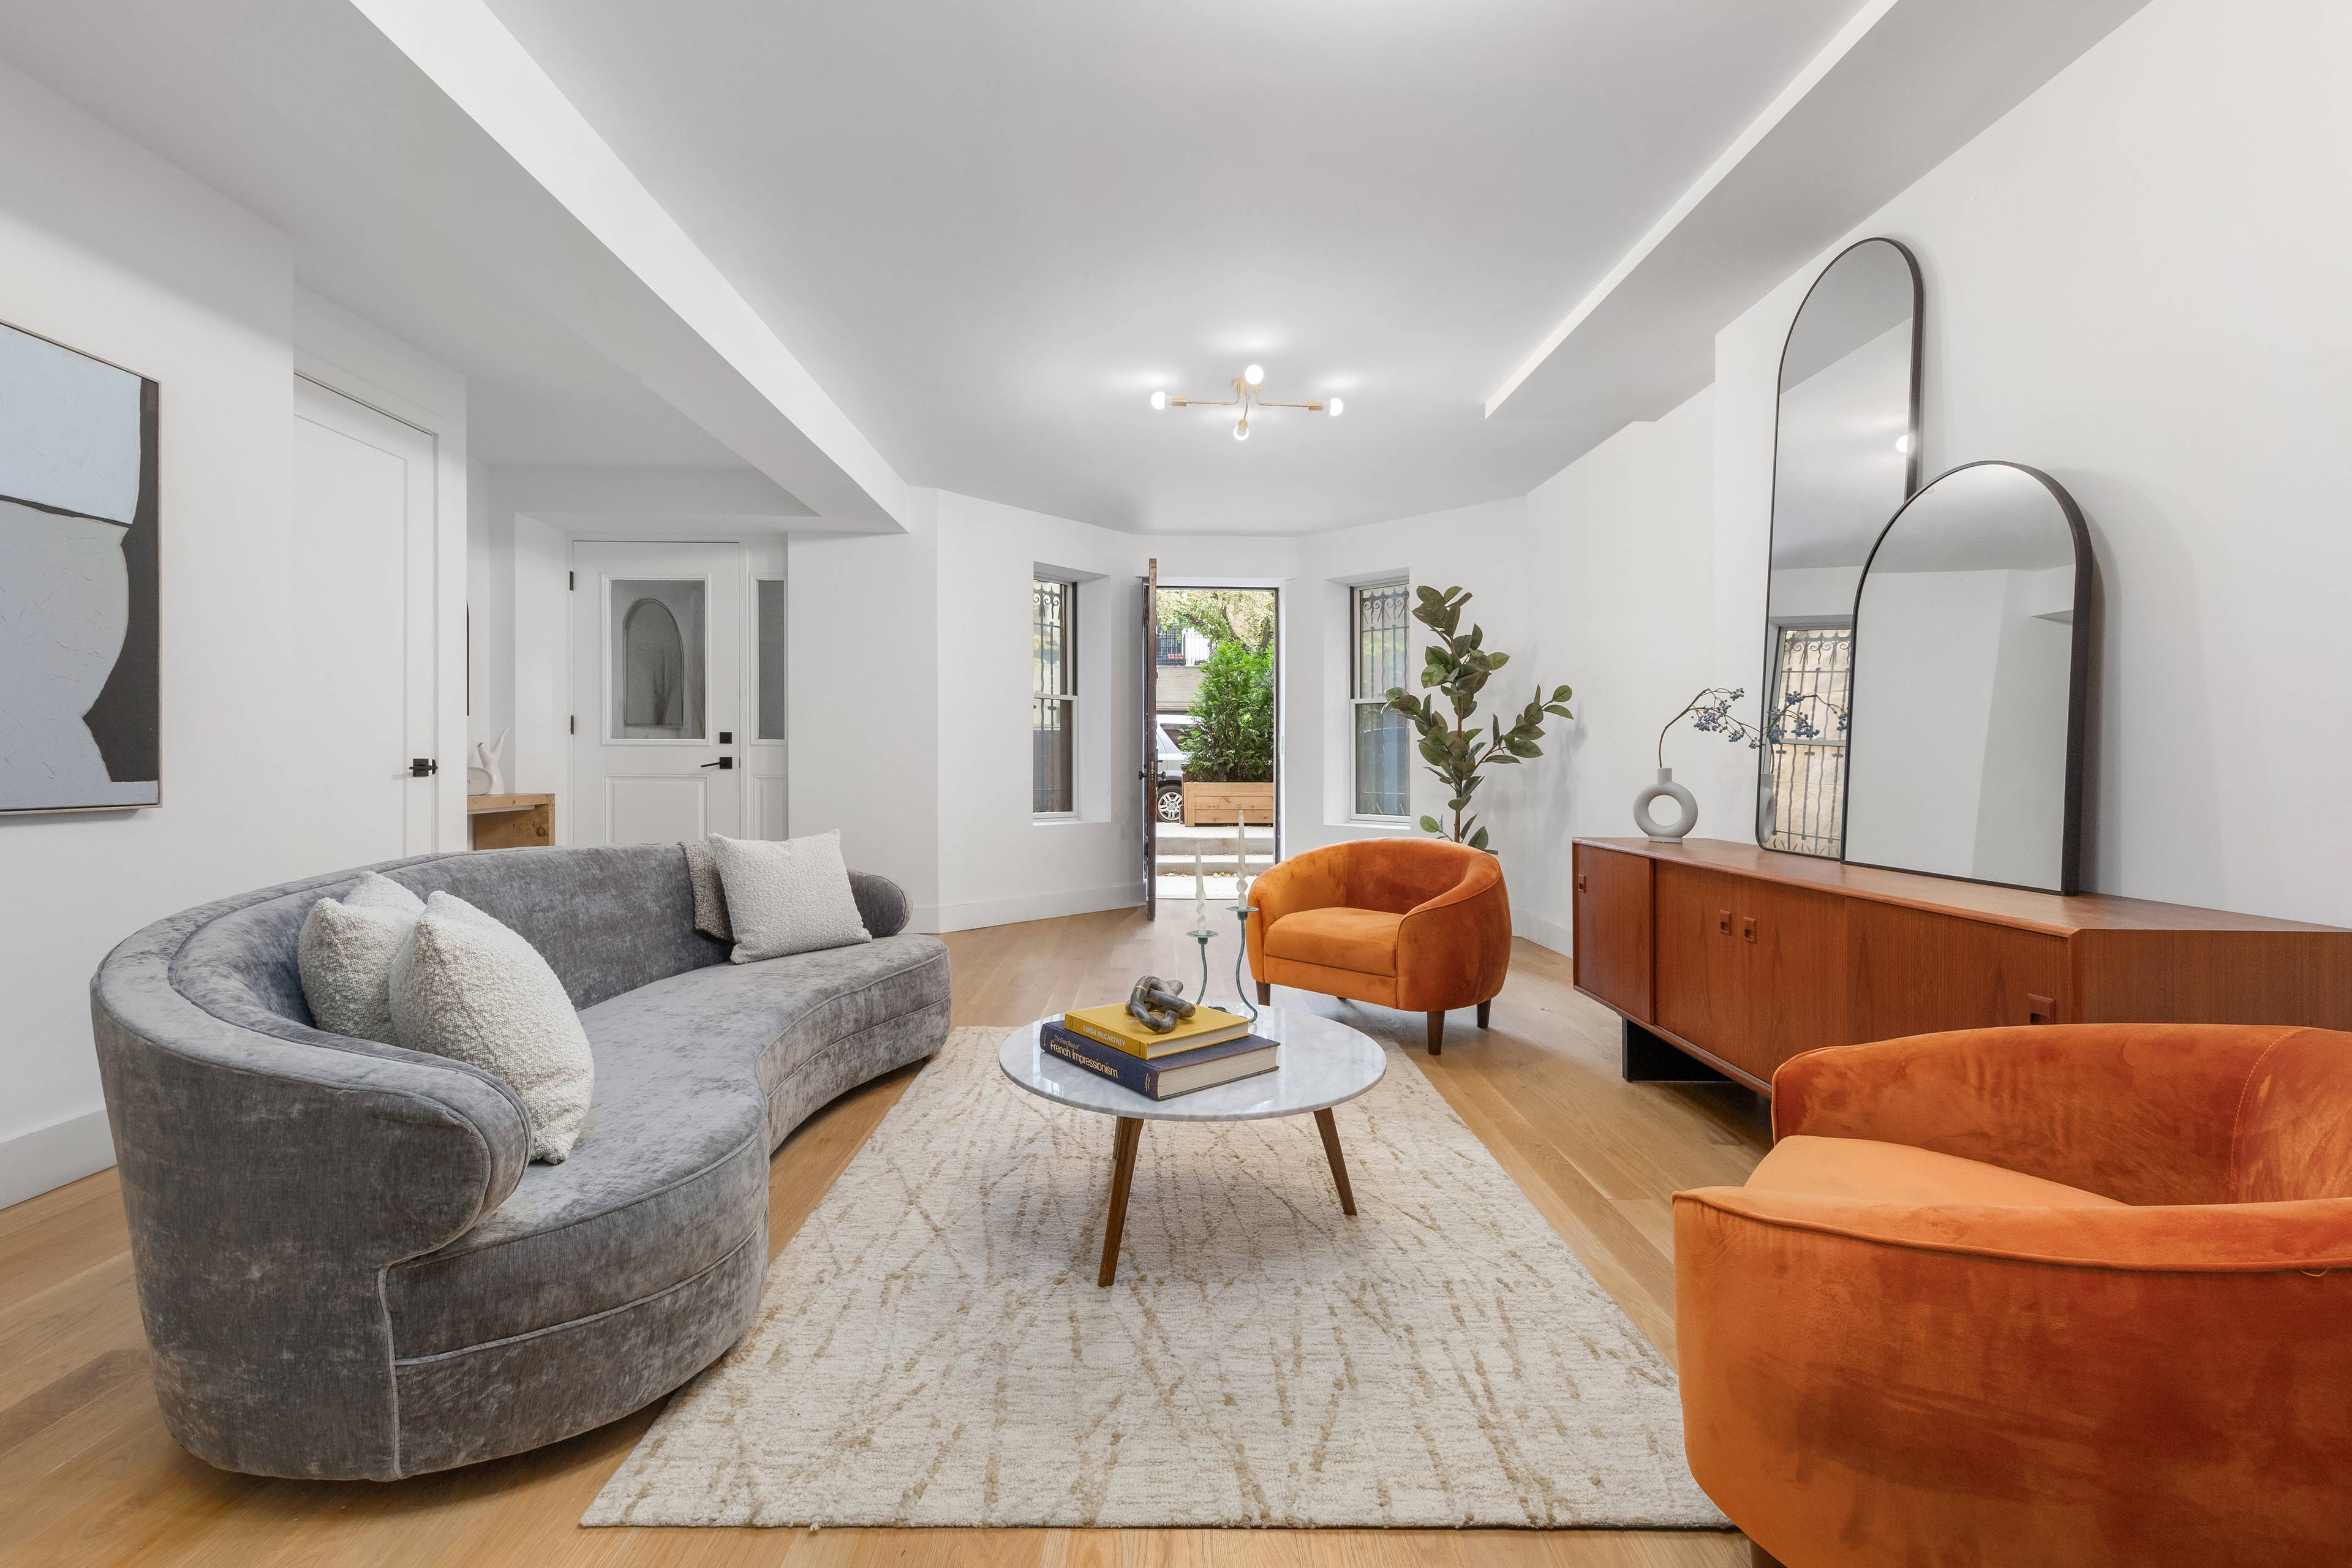 LUXURY NEW DEVELOPMENT CONDO IN THE HEART OF PARK SLOPE